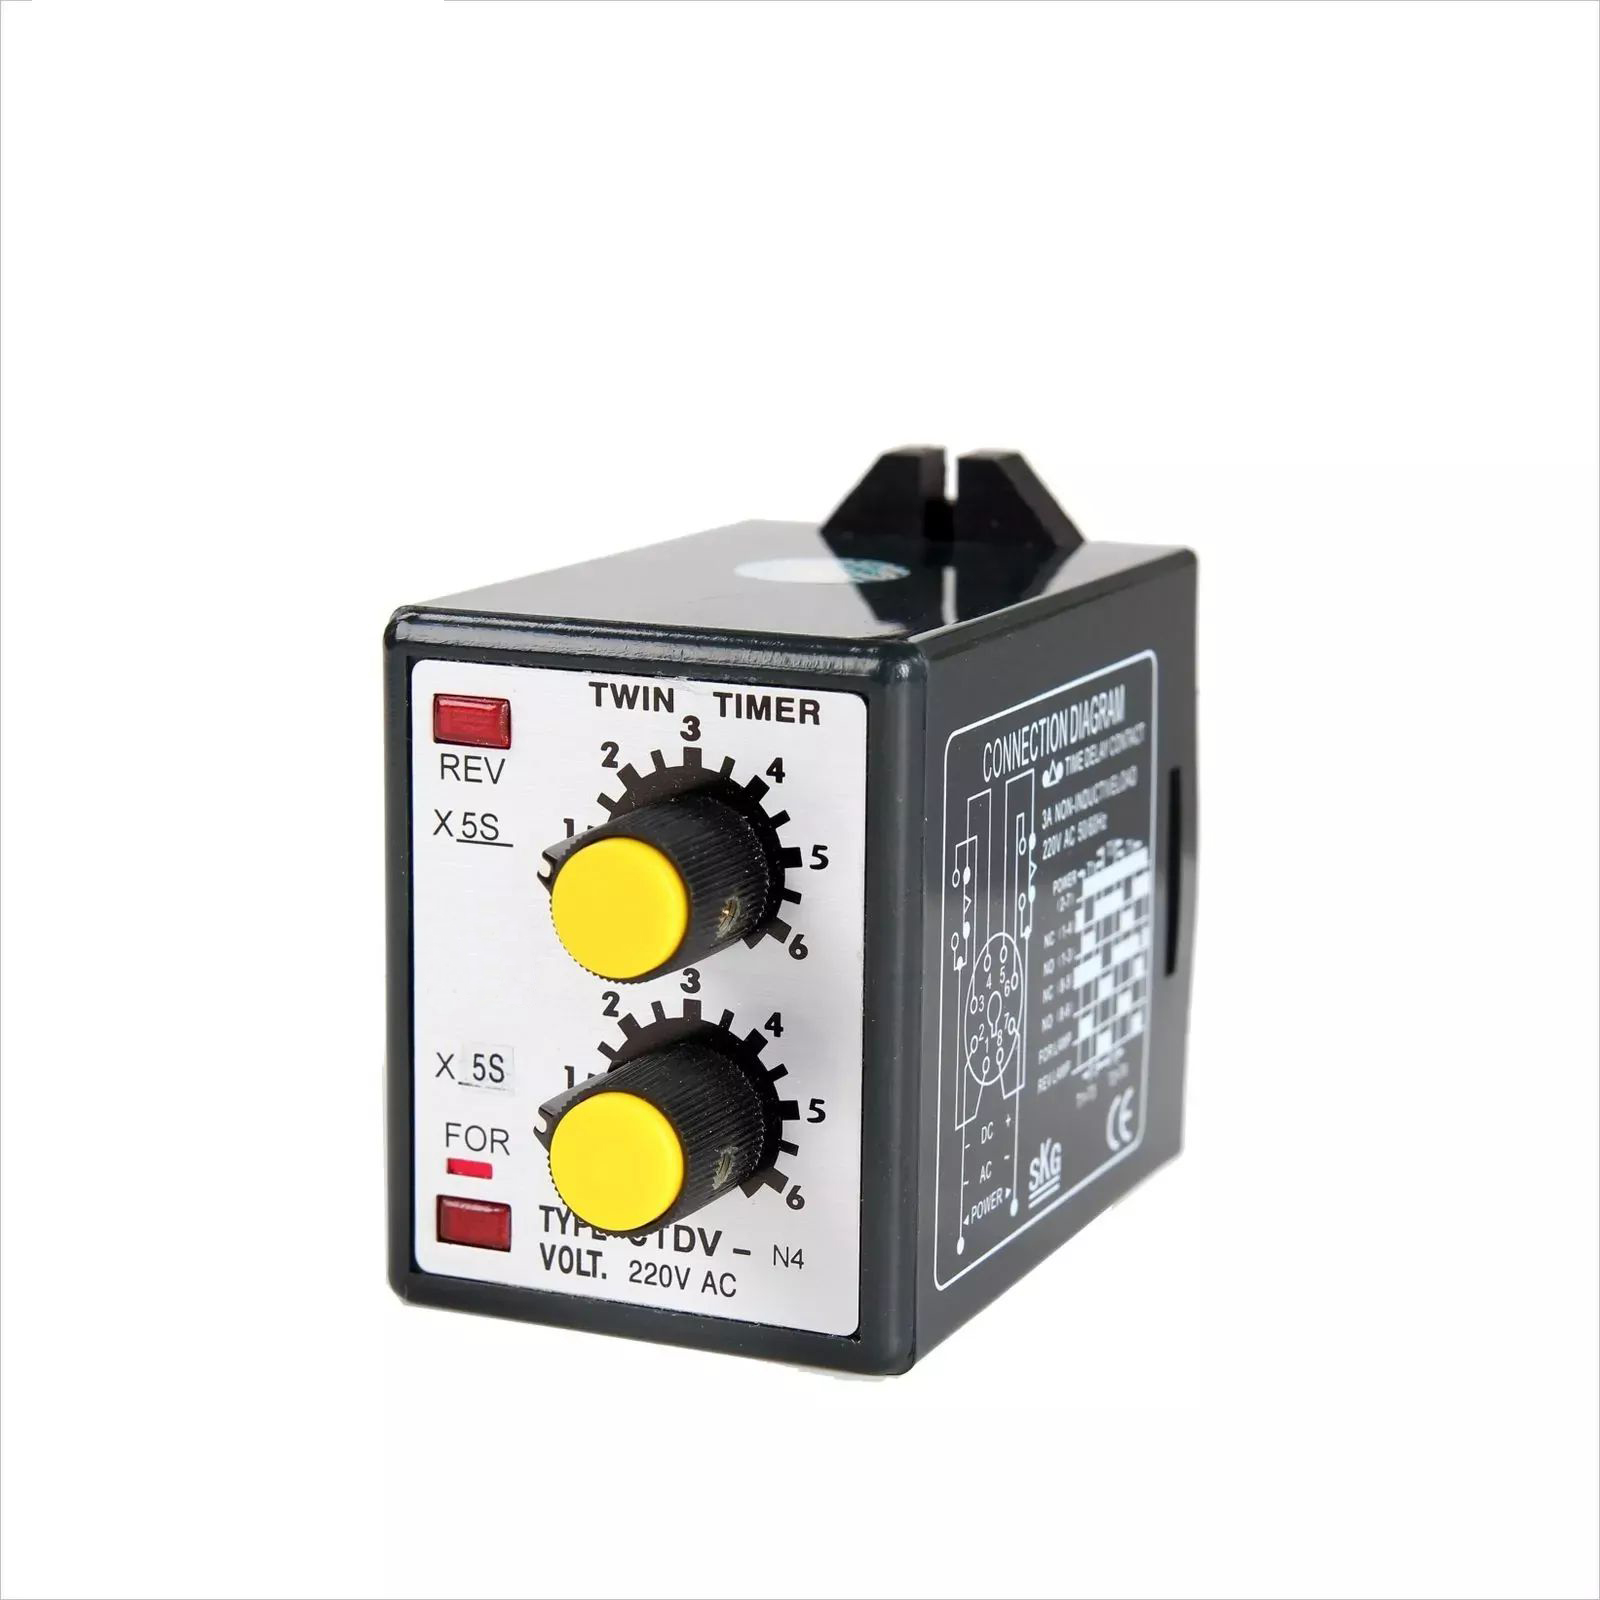 CTDV-N4 Mini size Double delay Industrial Electric Panel Timer Relay with knob Featured Image